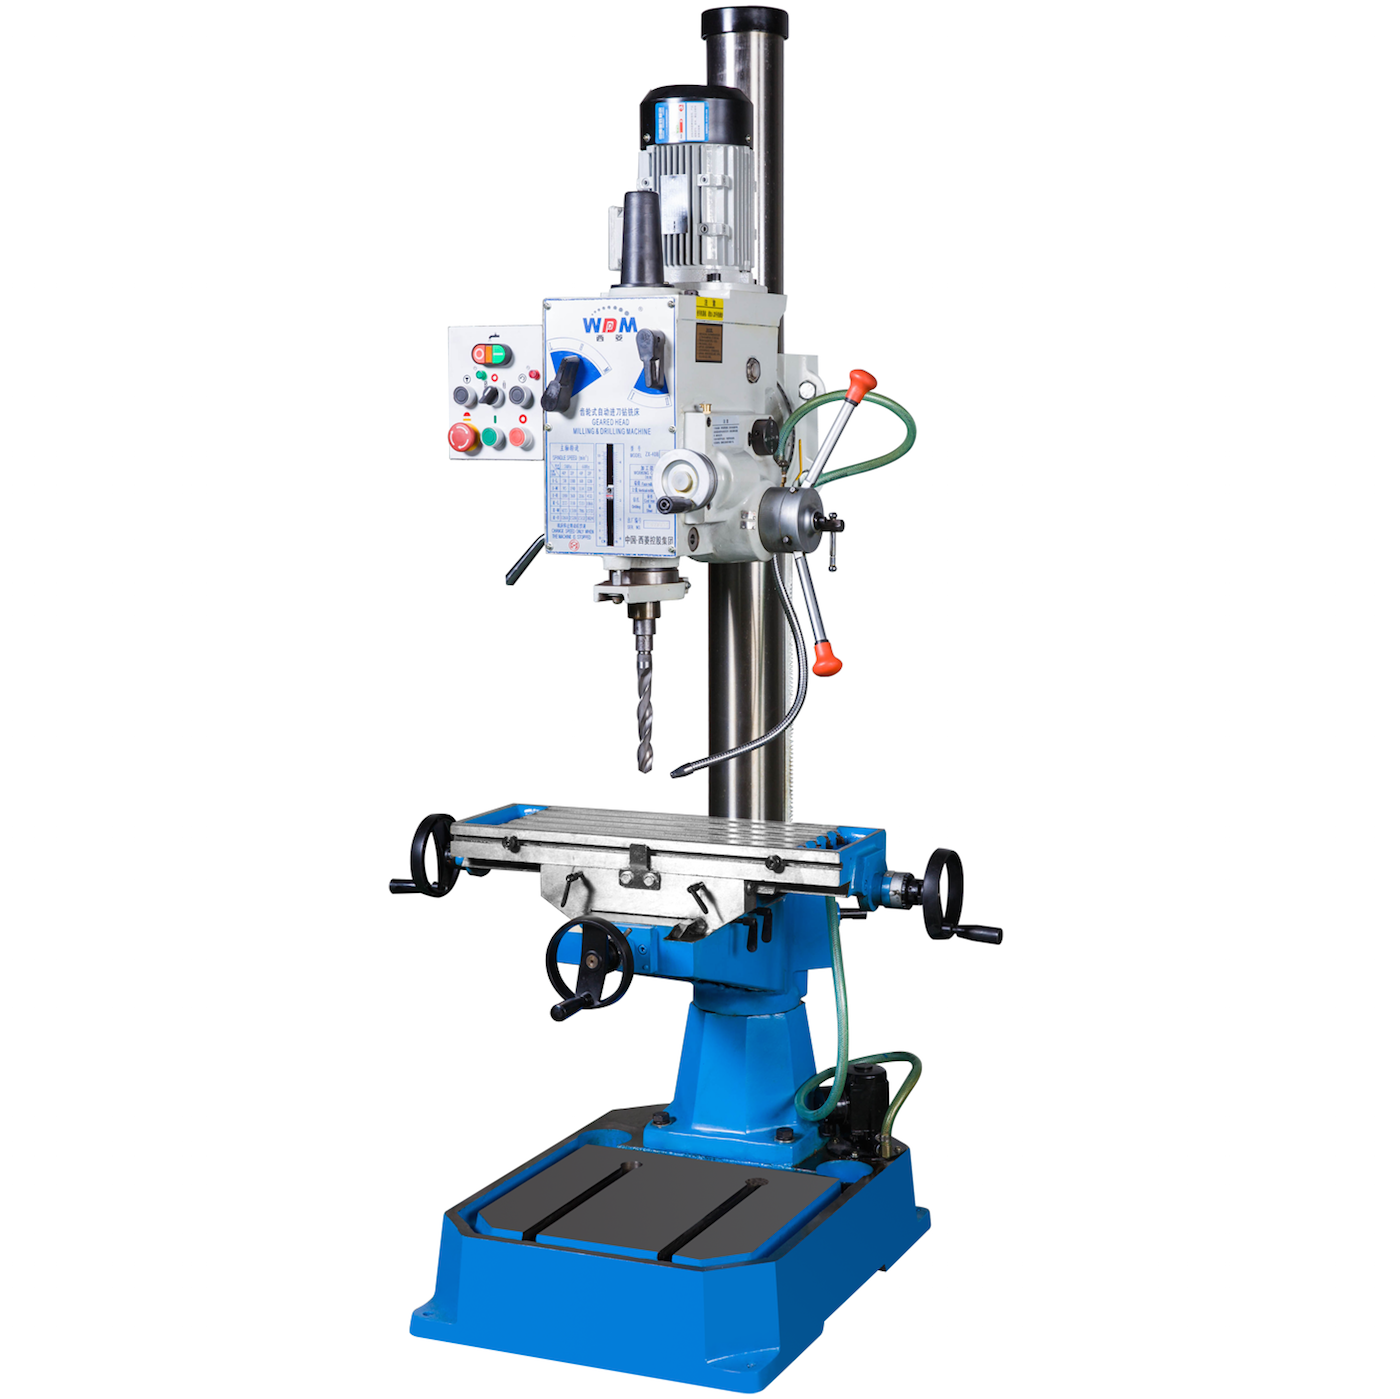 Xest Ling Drilling & Milling Machine 40mm,750W, ZX-40BPC